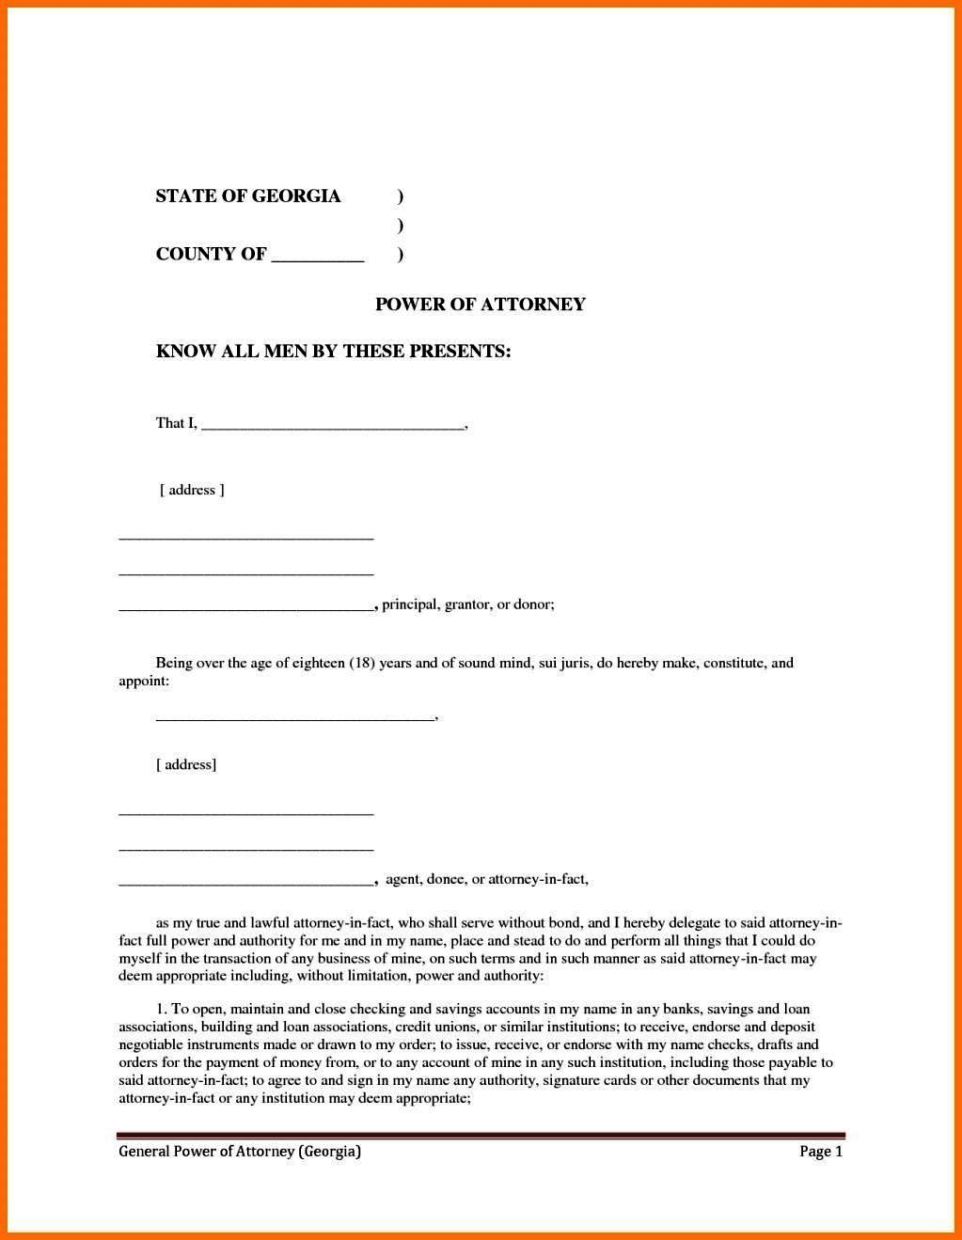 free-printable-power-of-attorney-forms-utah-printable-forms-free-online